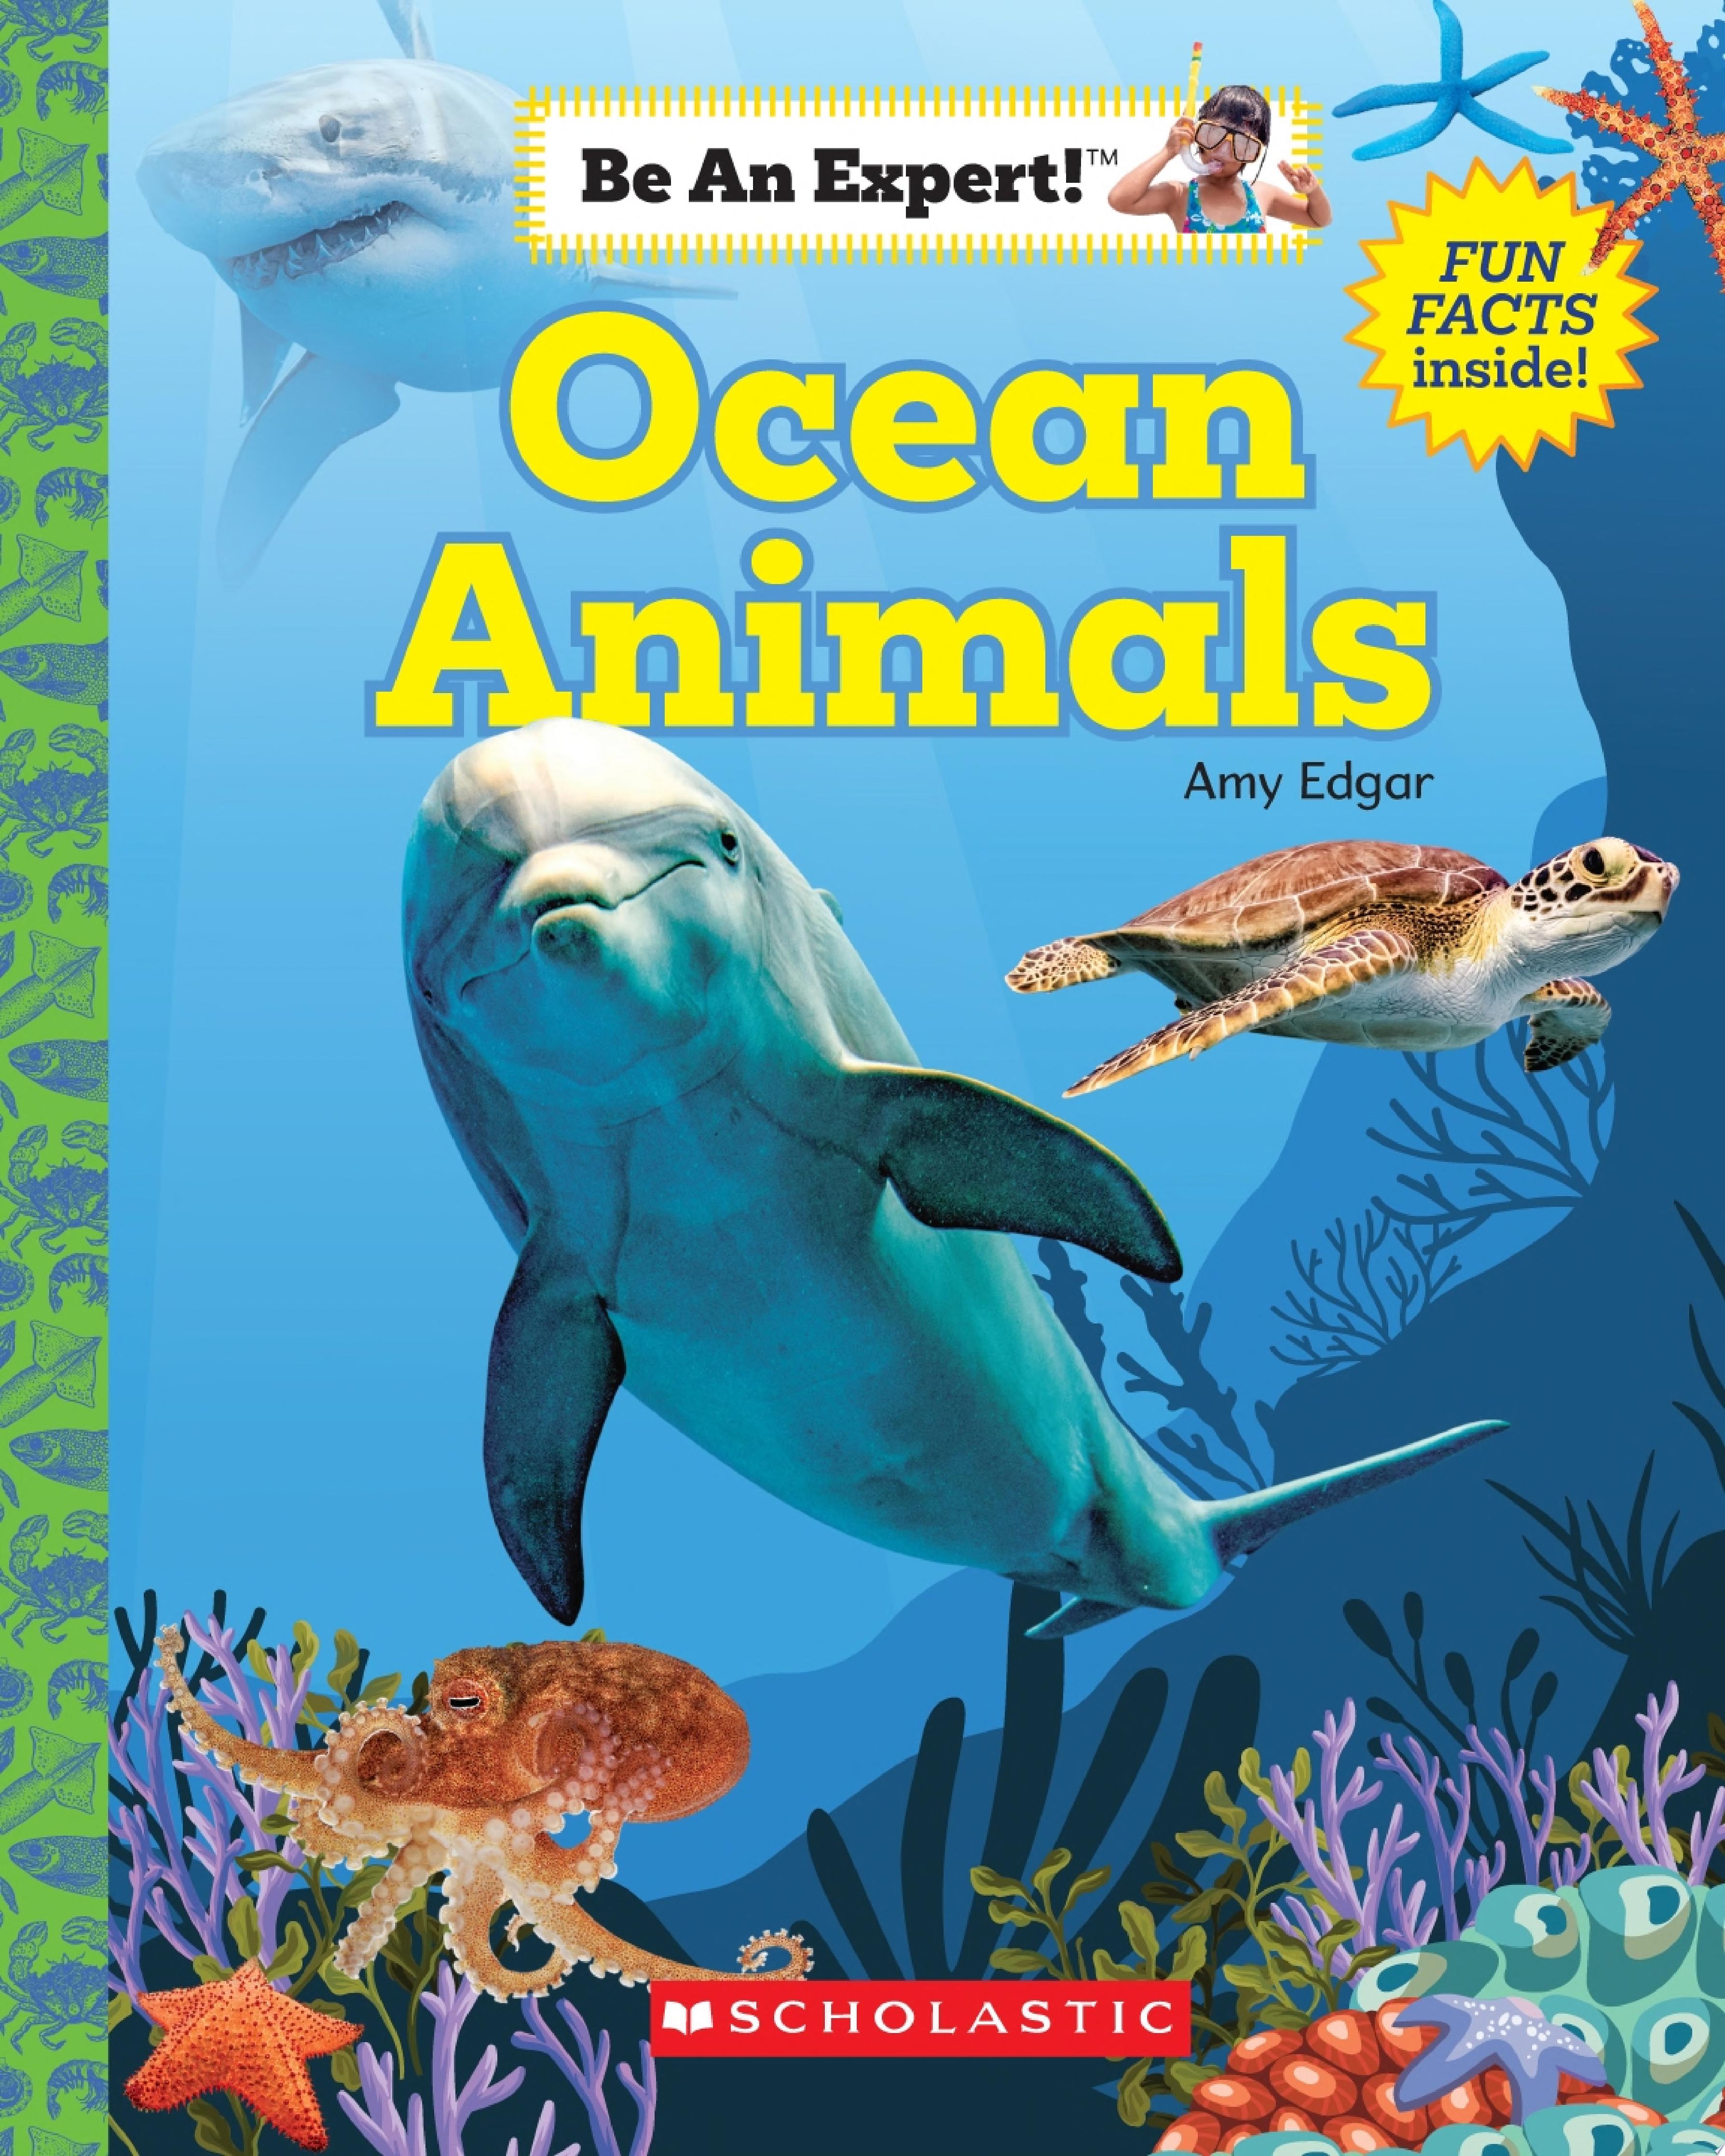 Image for "Ocean Animals (Be An Expert!)"